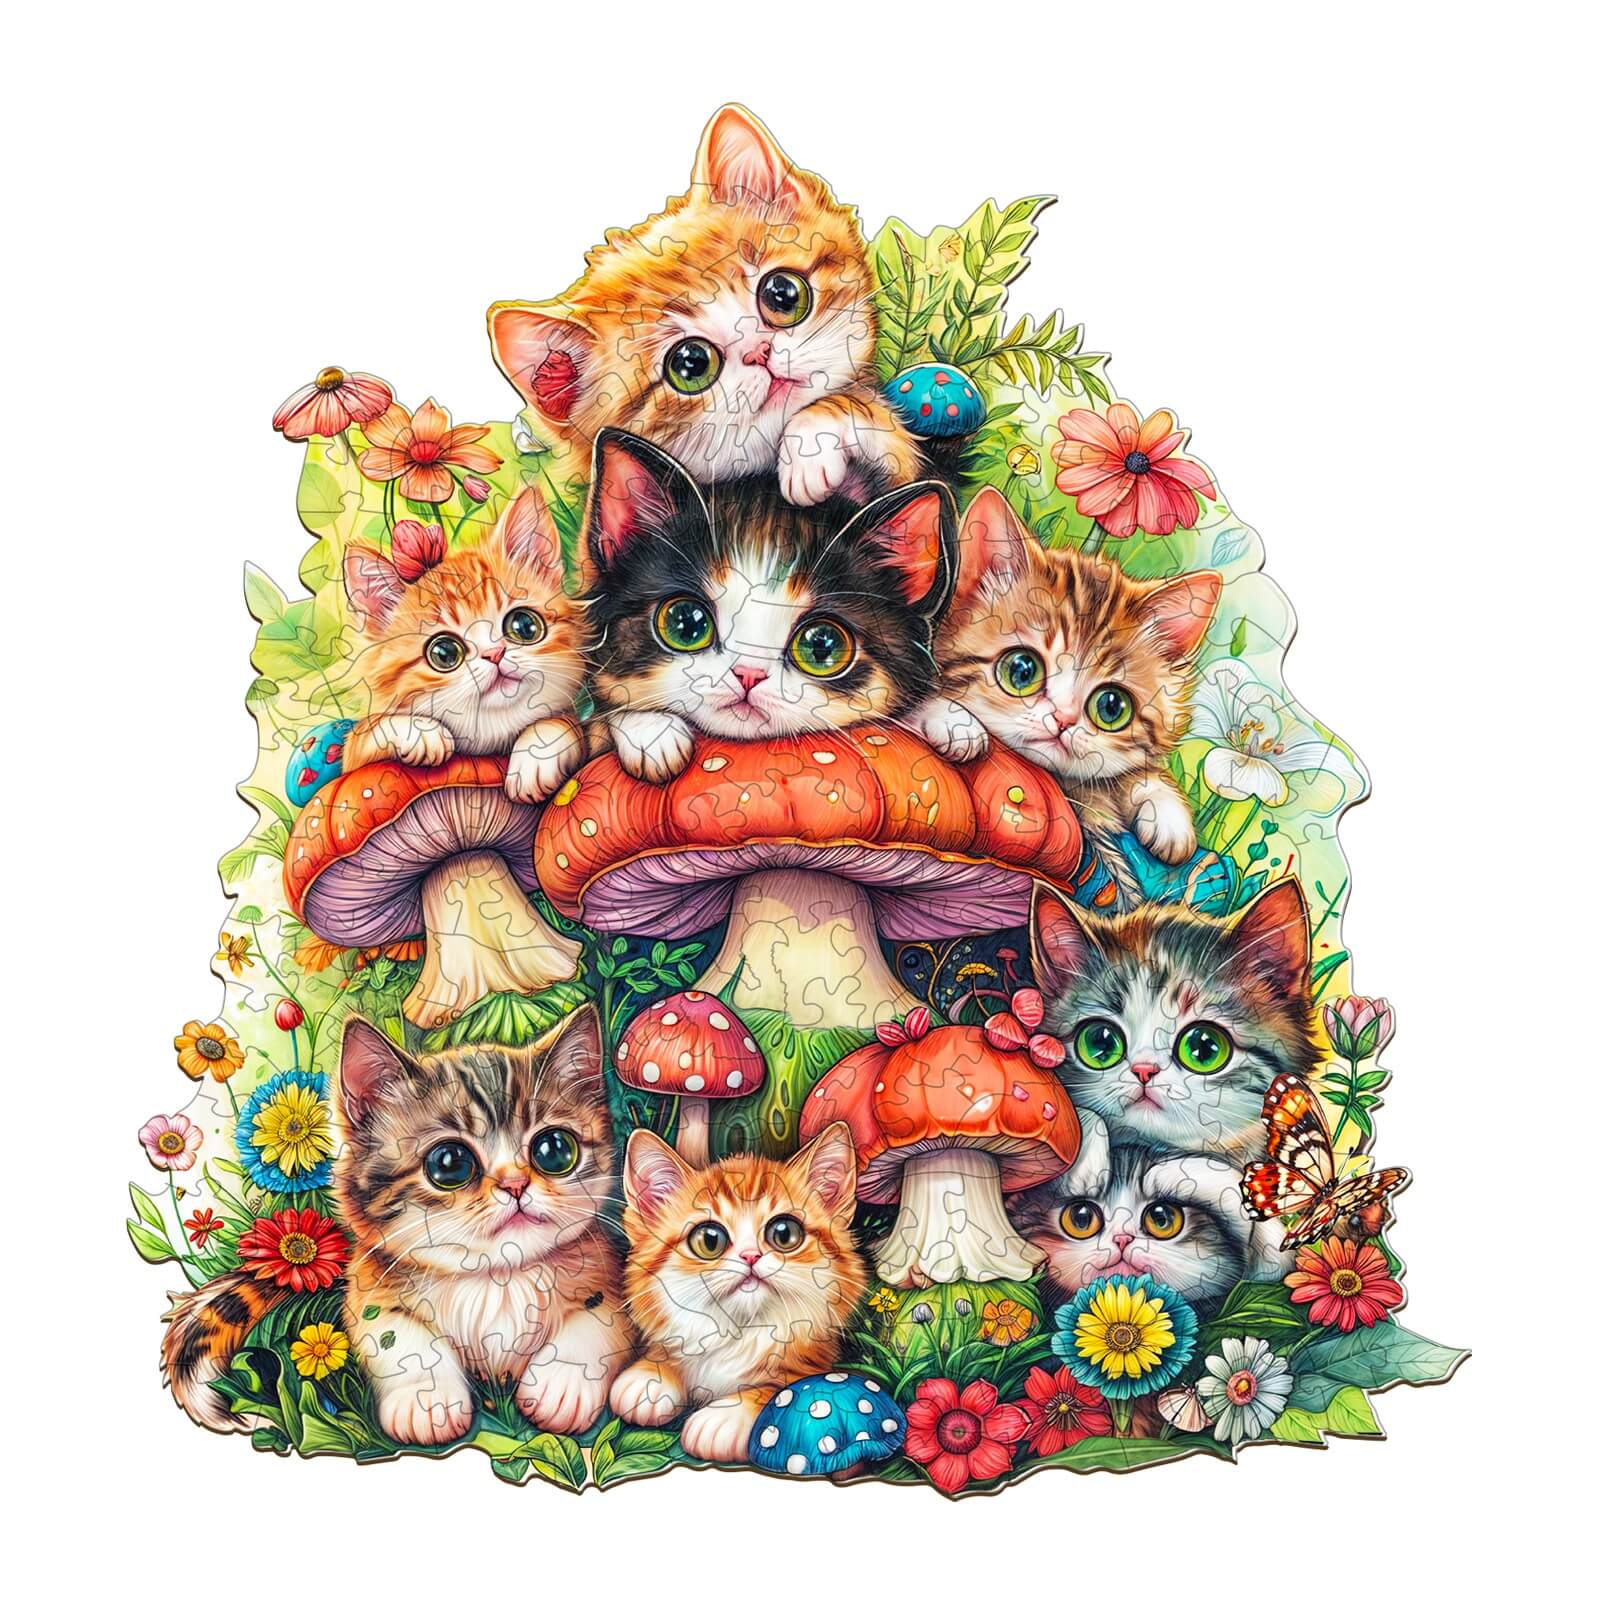 Cat Family Wooden Jigsaw Puzzle